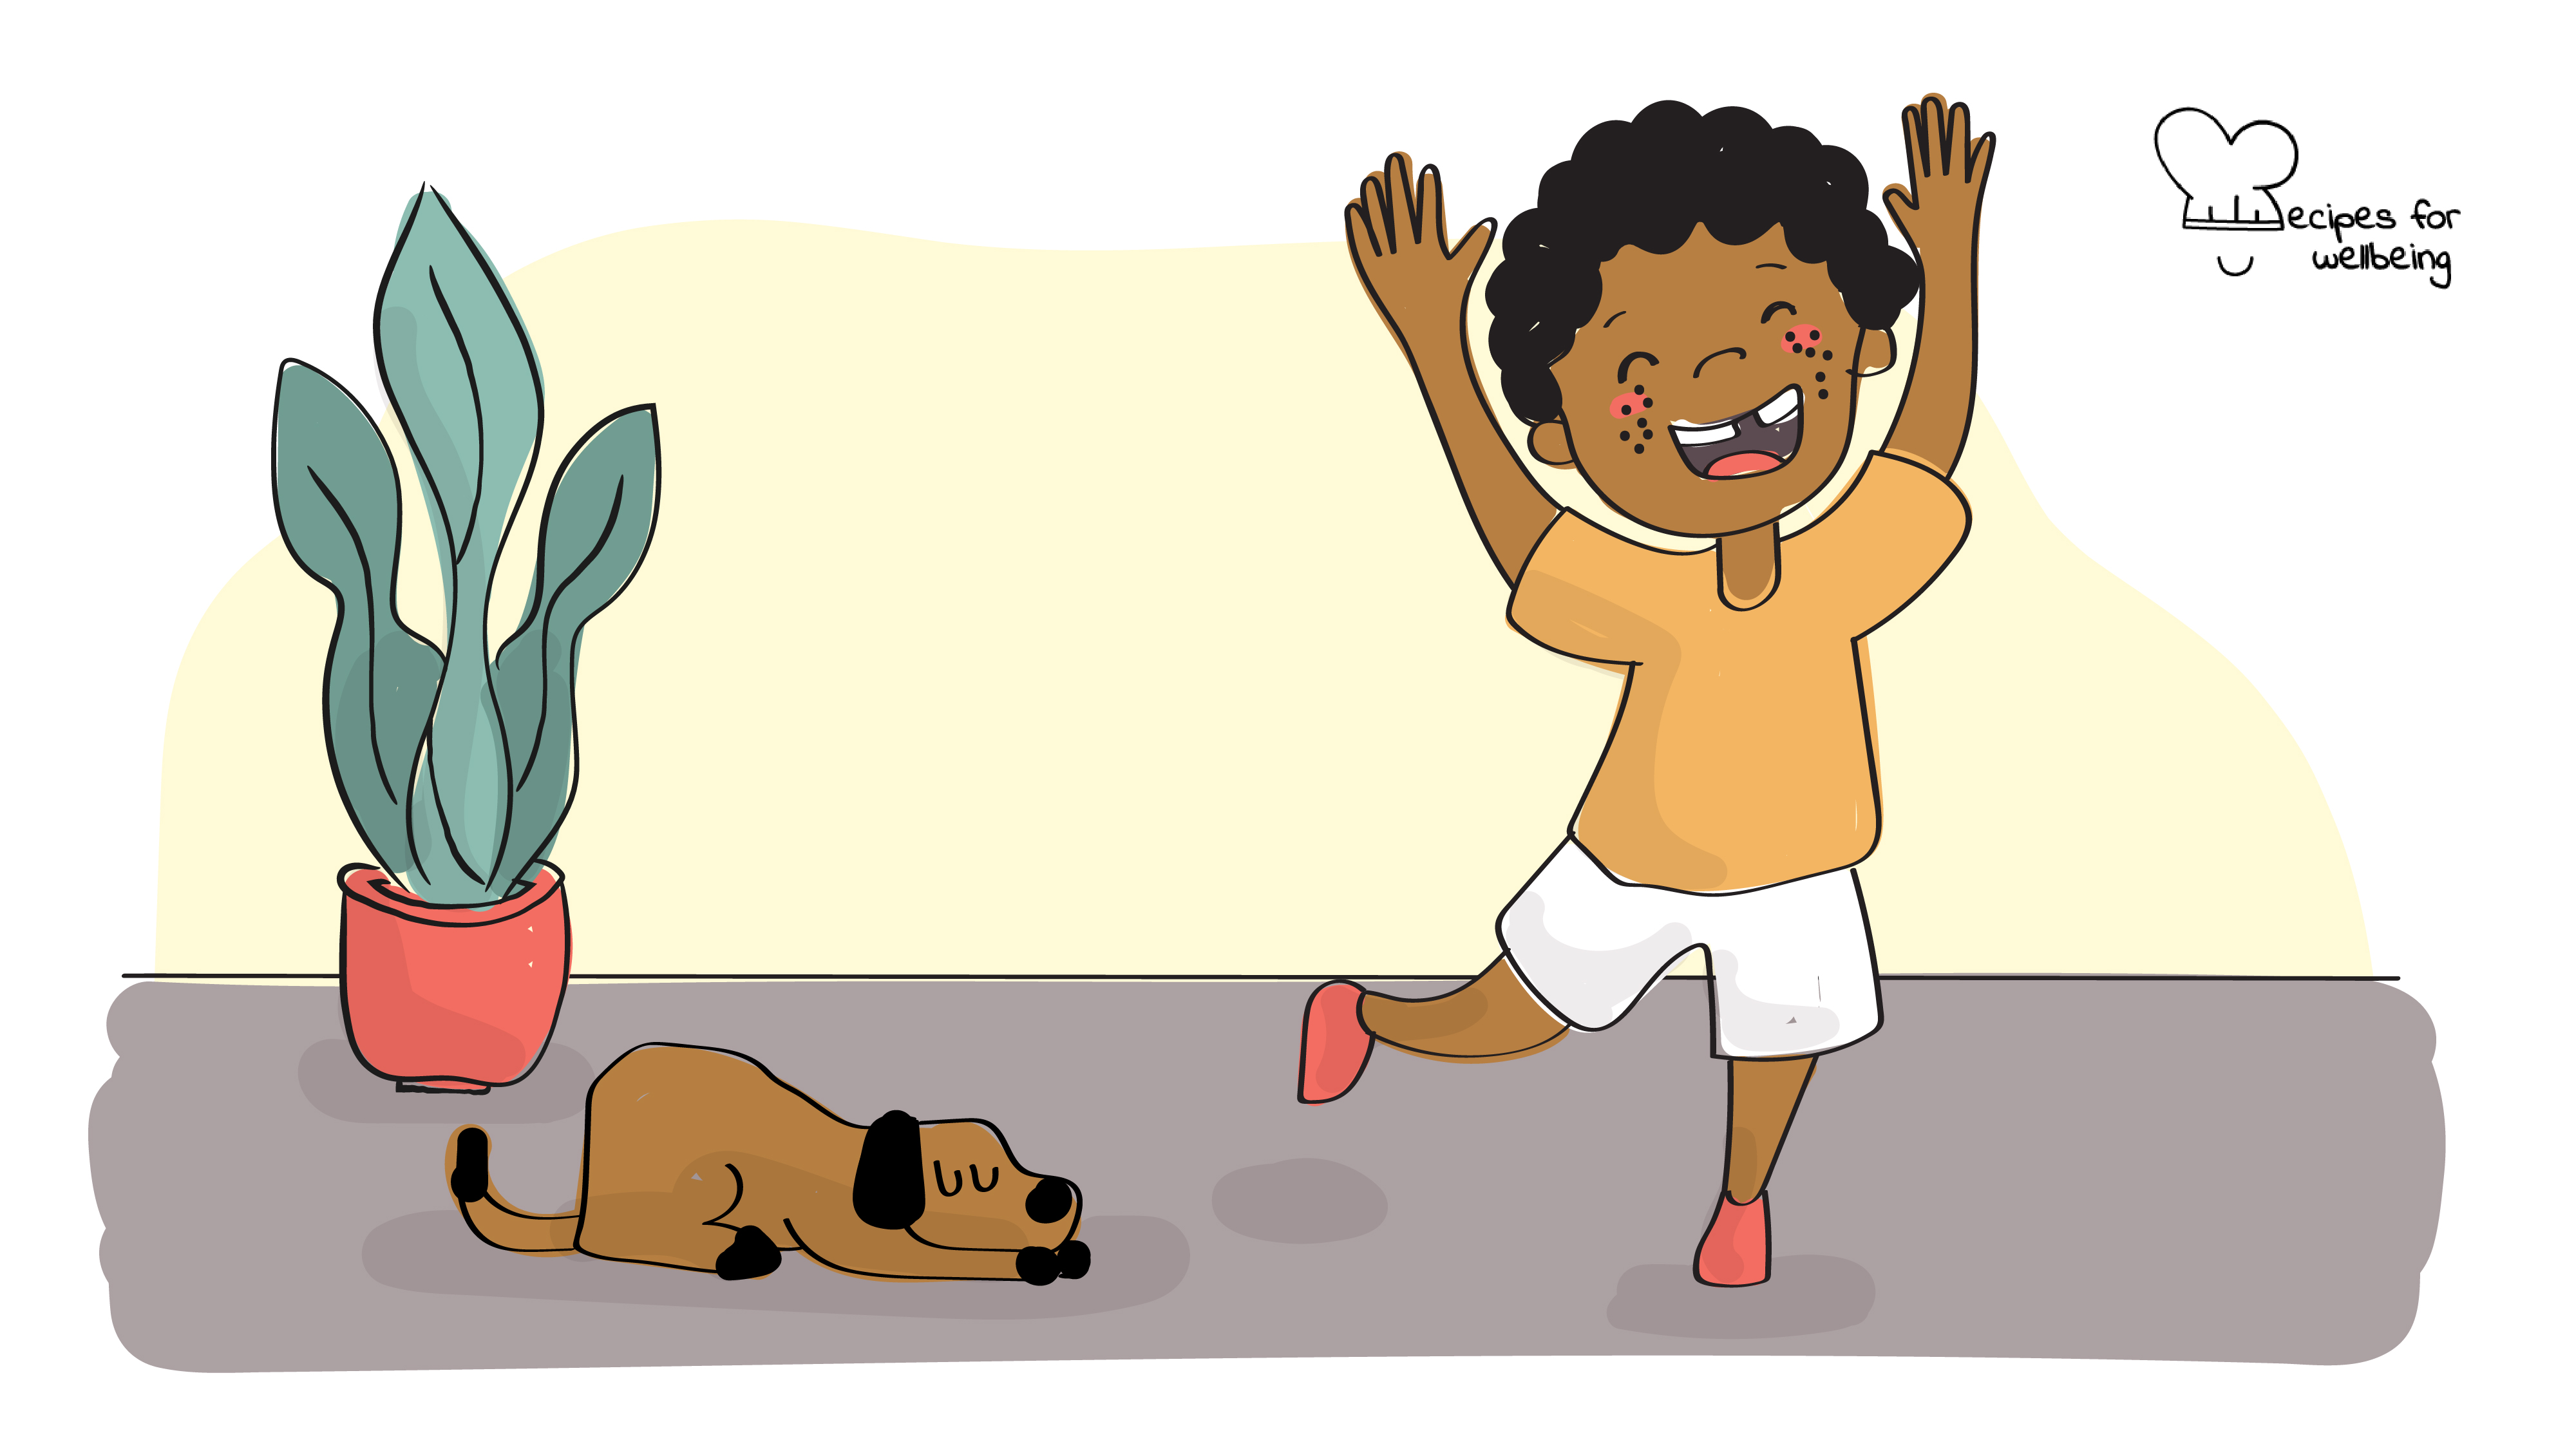 Illustration of a child in a cheerful pose with a sleeping dog and a plant by the side. © Recipes for Wellbeing